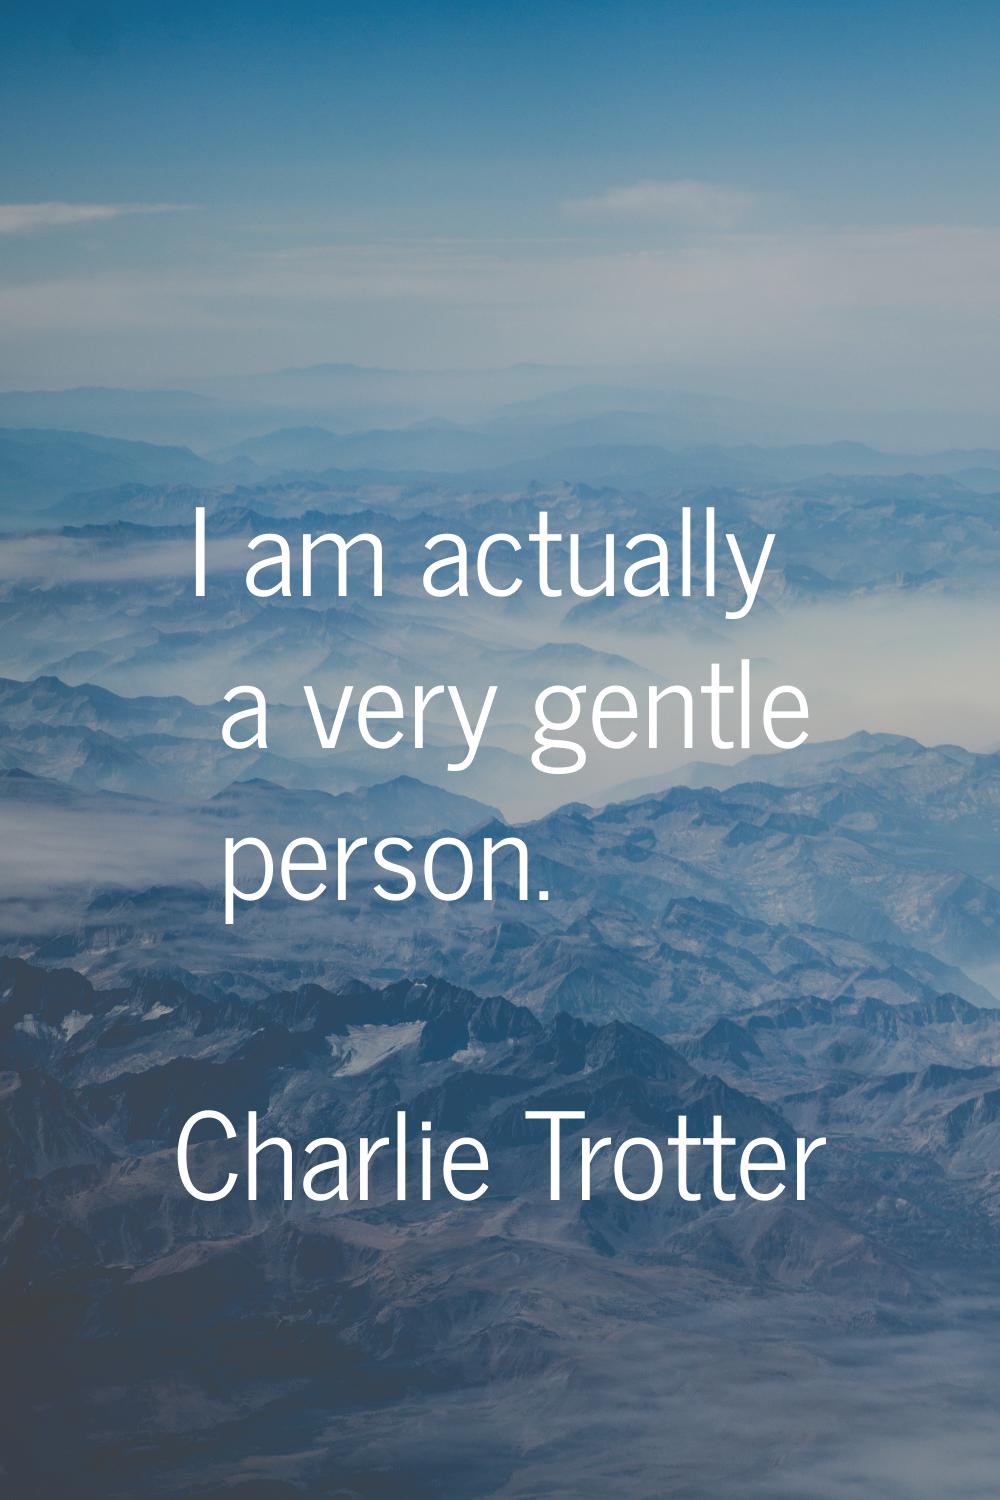 I am actually a very gentle person.